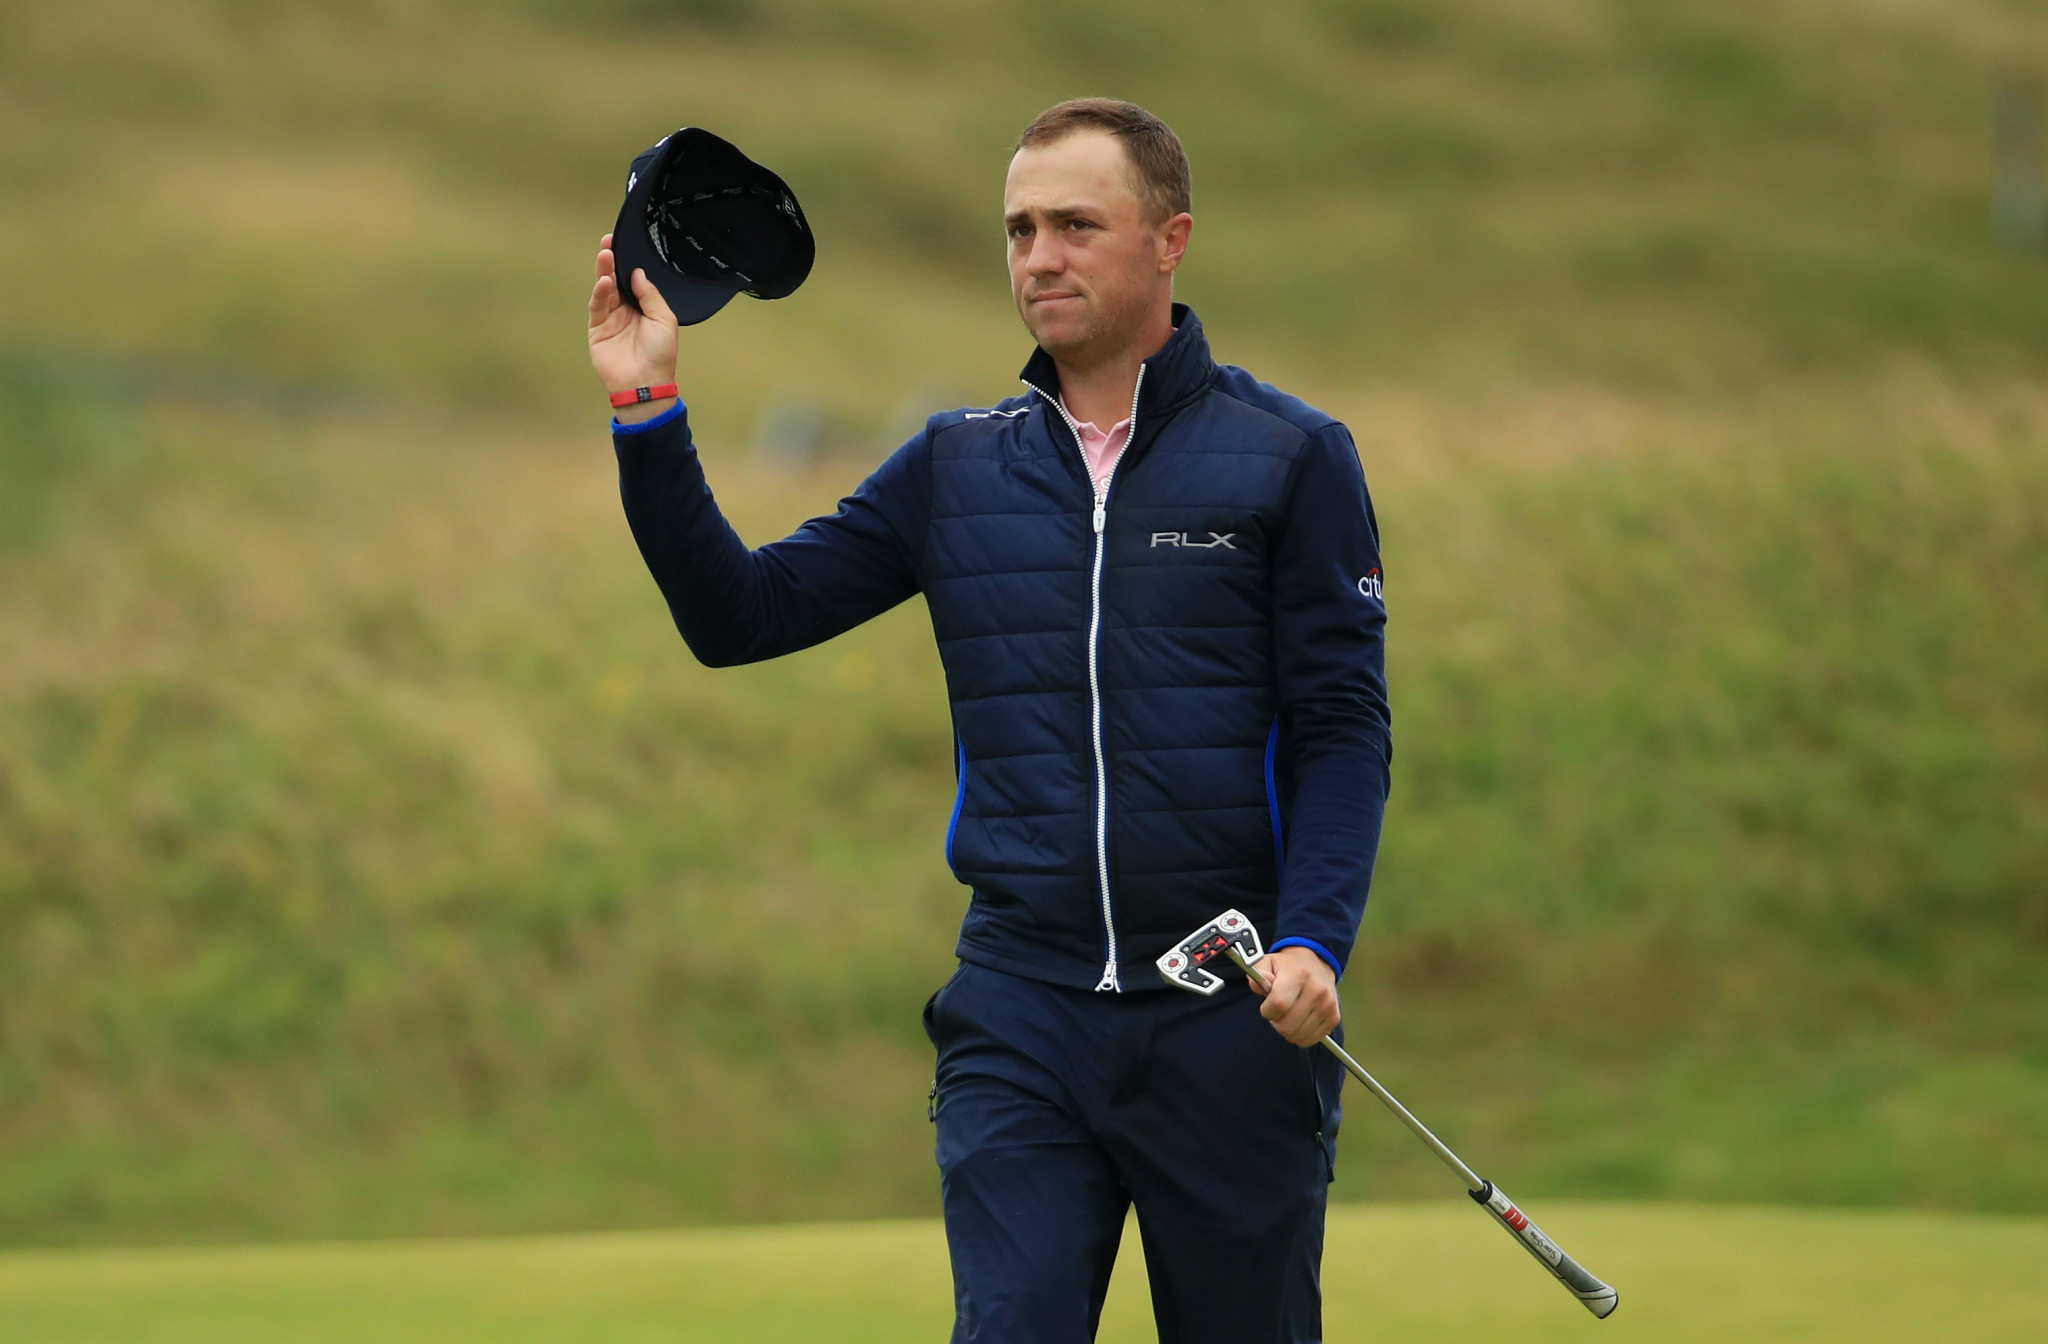 Justin Thomas of the United States can claim to be defending champion at the third World Golf Championship event of the season that starts in Memphis, Tennessee tomorrow ©Getty Images